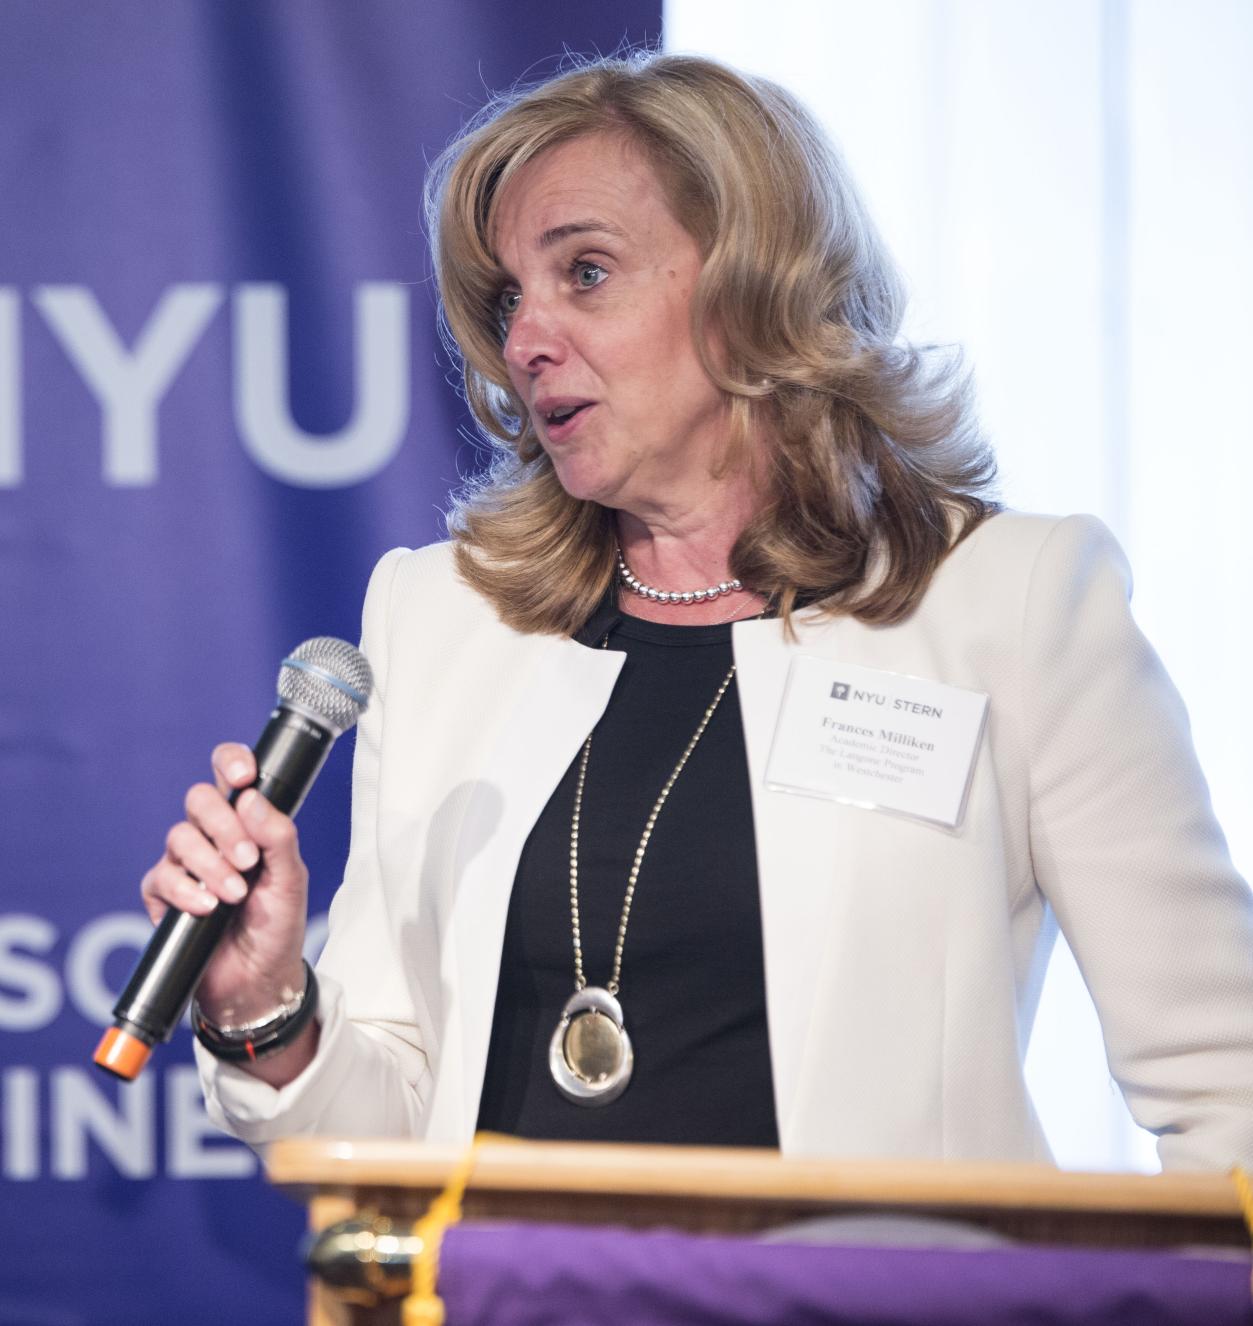 Professor Frances Milliken speaking at a podium in front of an NYU Stern banner